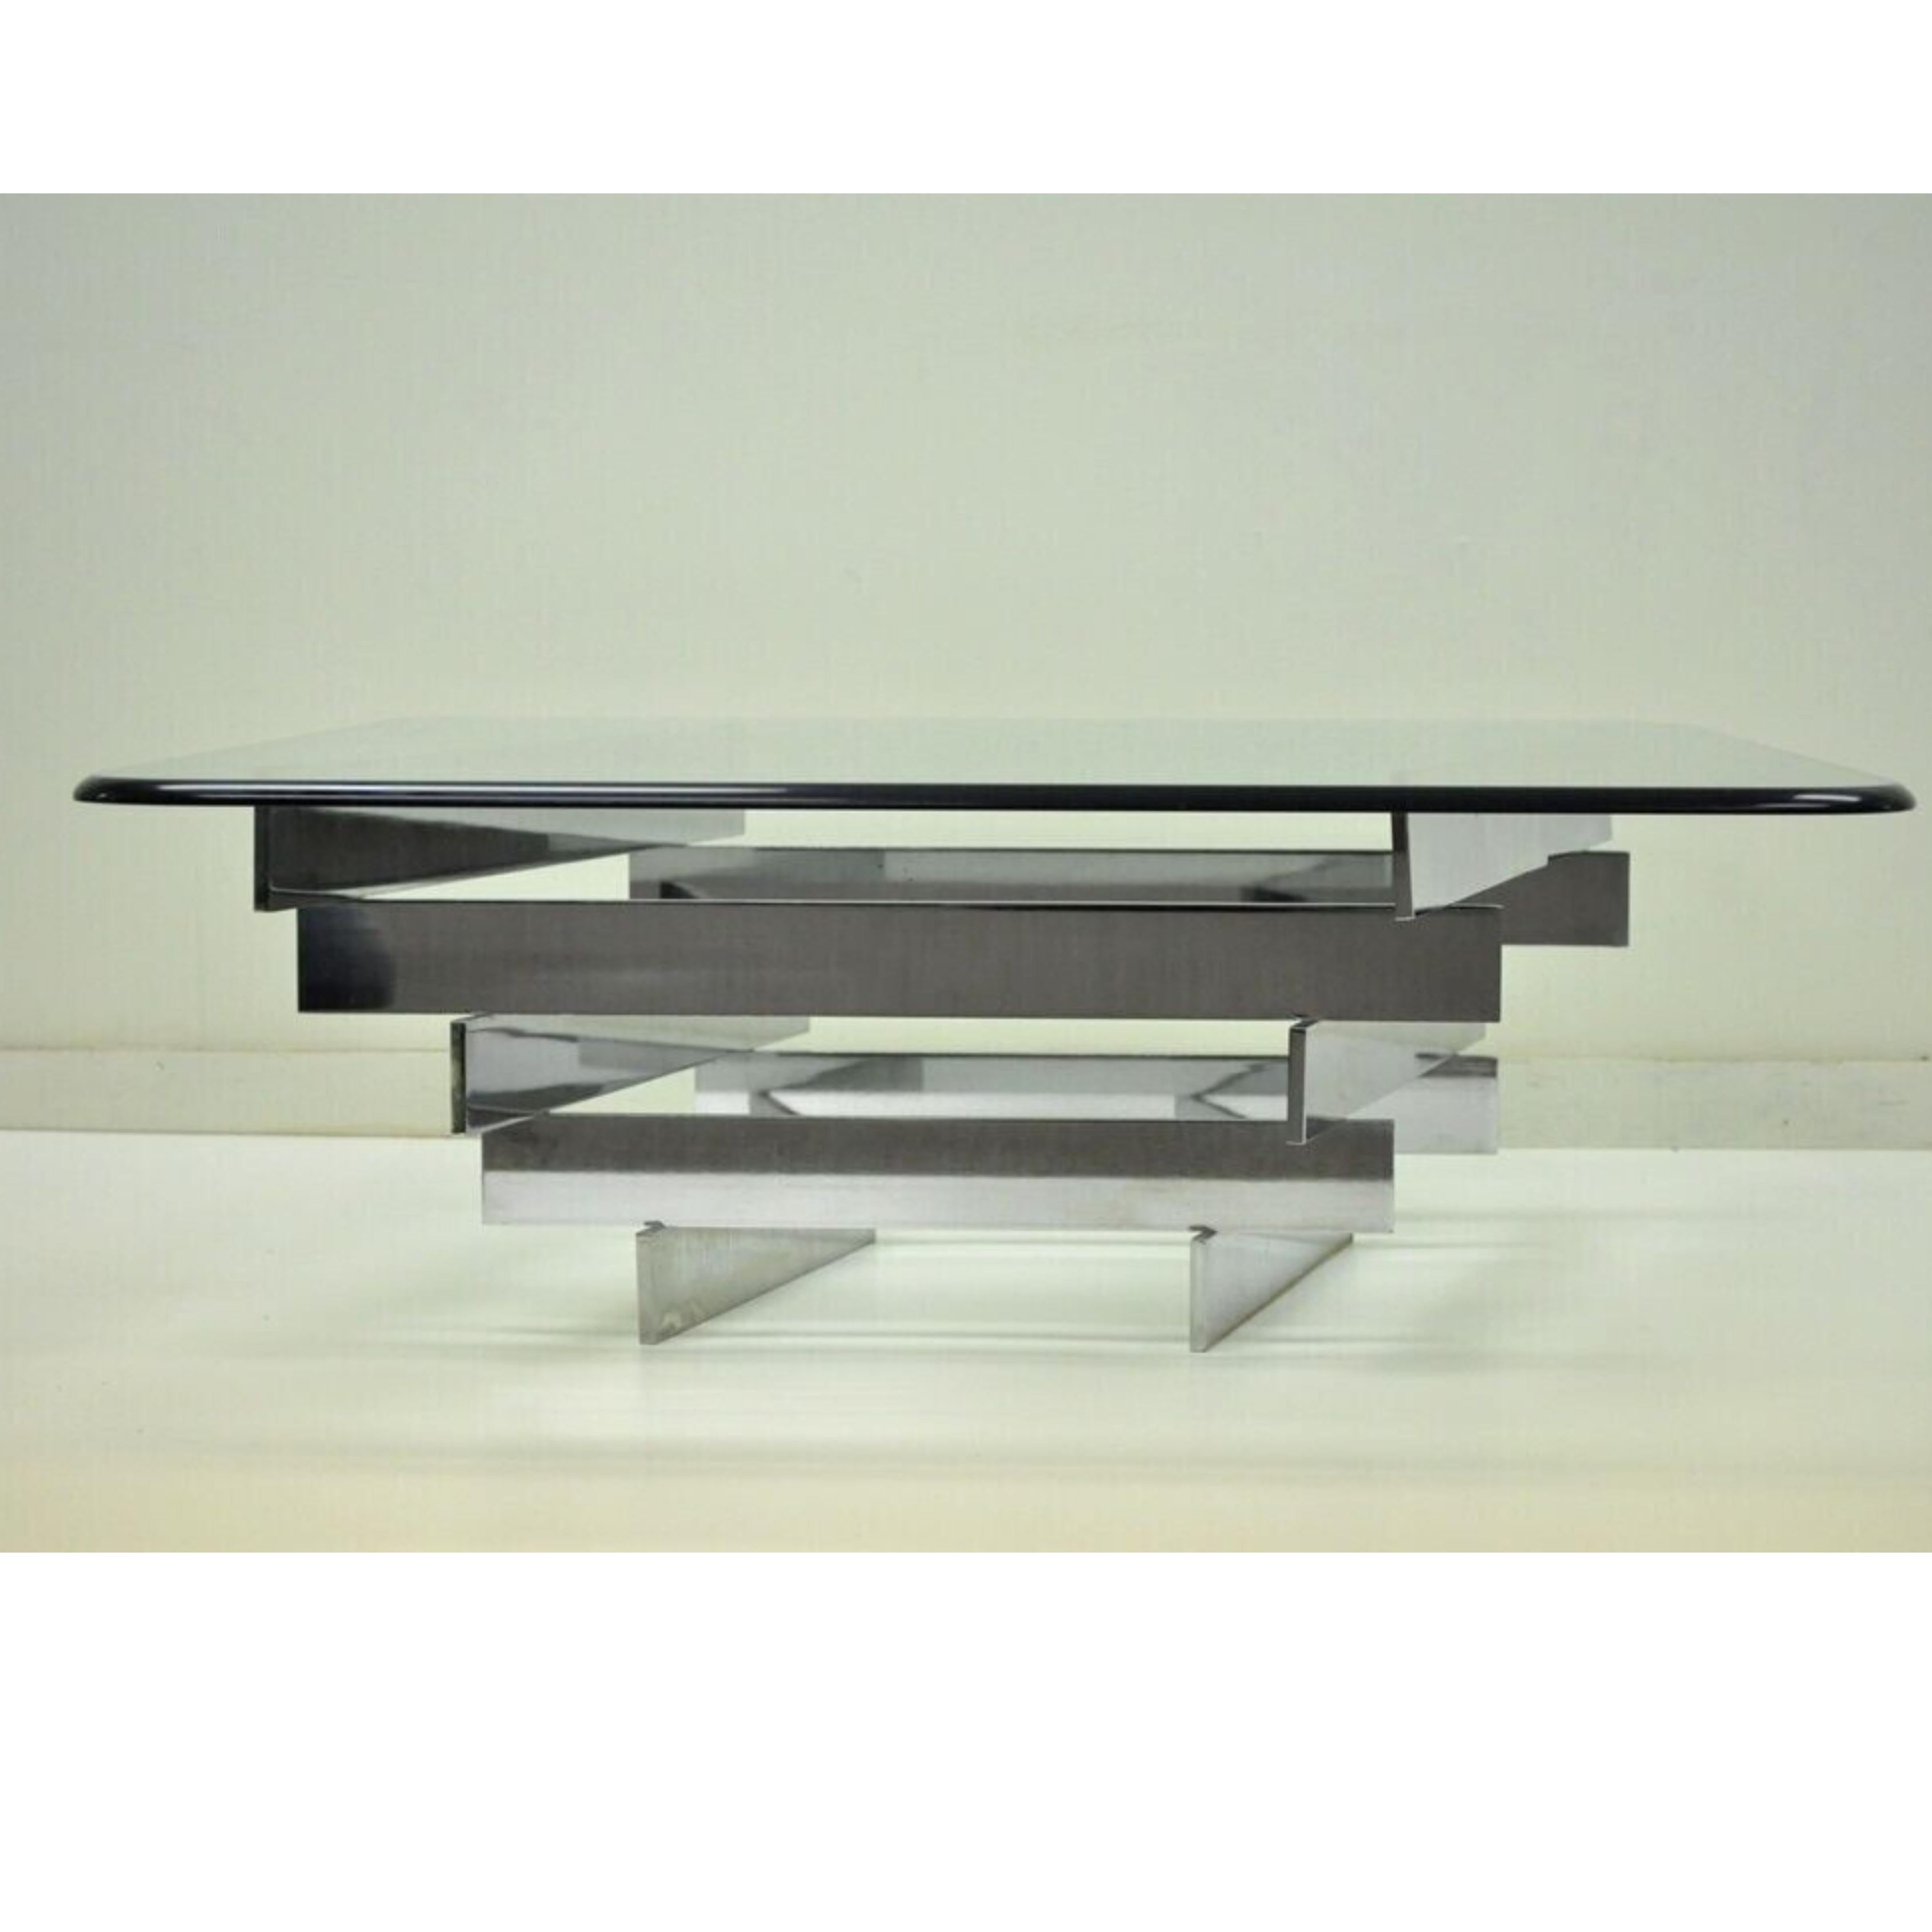 Vintage Mid Century Modern Paul Mayen for Habitat Chrome Stack Glass Coffee Table. Item featured chrome steel finish with a heavy solid base, modern stacked design, very nice vintage item. Attributed to Paul Mayen for Habitat. Circa 1970s.